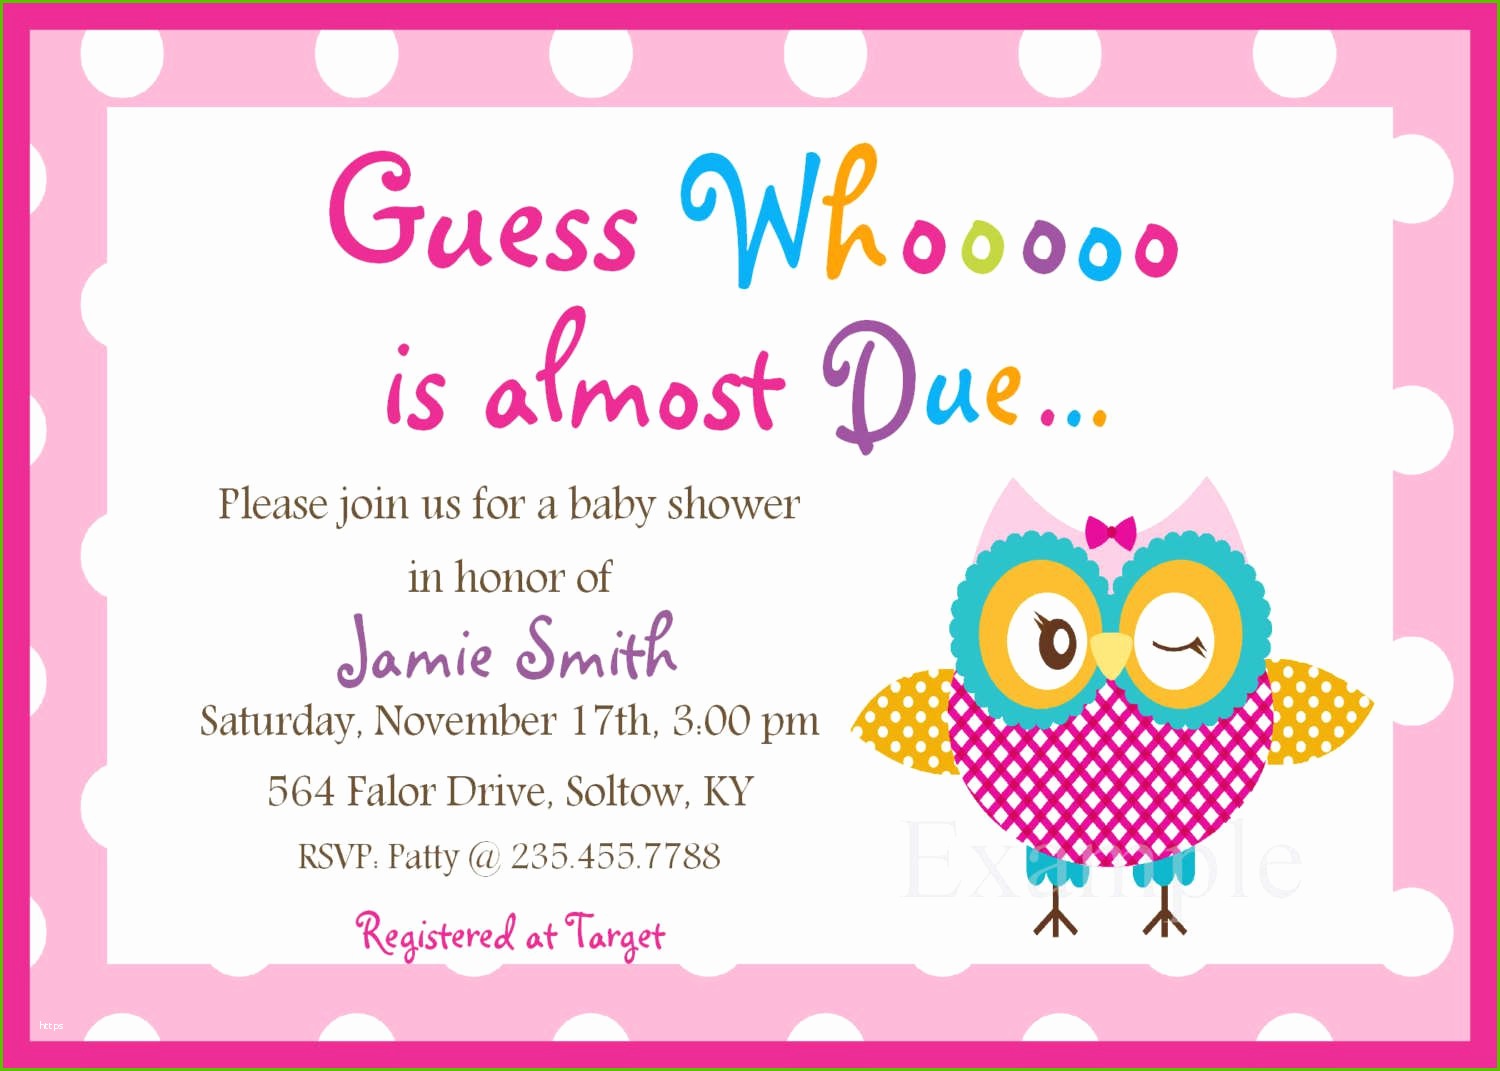 Full Size of Baby Shower:sturdy Baby Shower Invitation Template Image Concepts Baby Shower Invitation Card Template Free Download Admirably Baby Baby Shower Invitation Card Template Free Download Admirably Baby Shower Invitations Templates Free Download